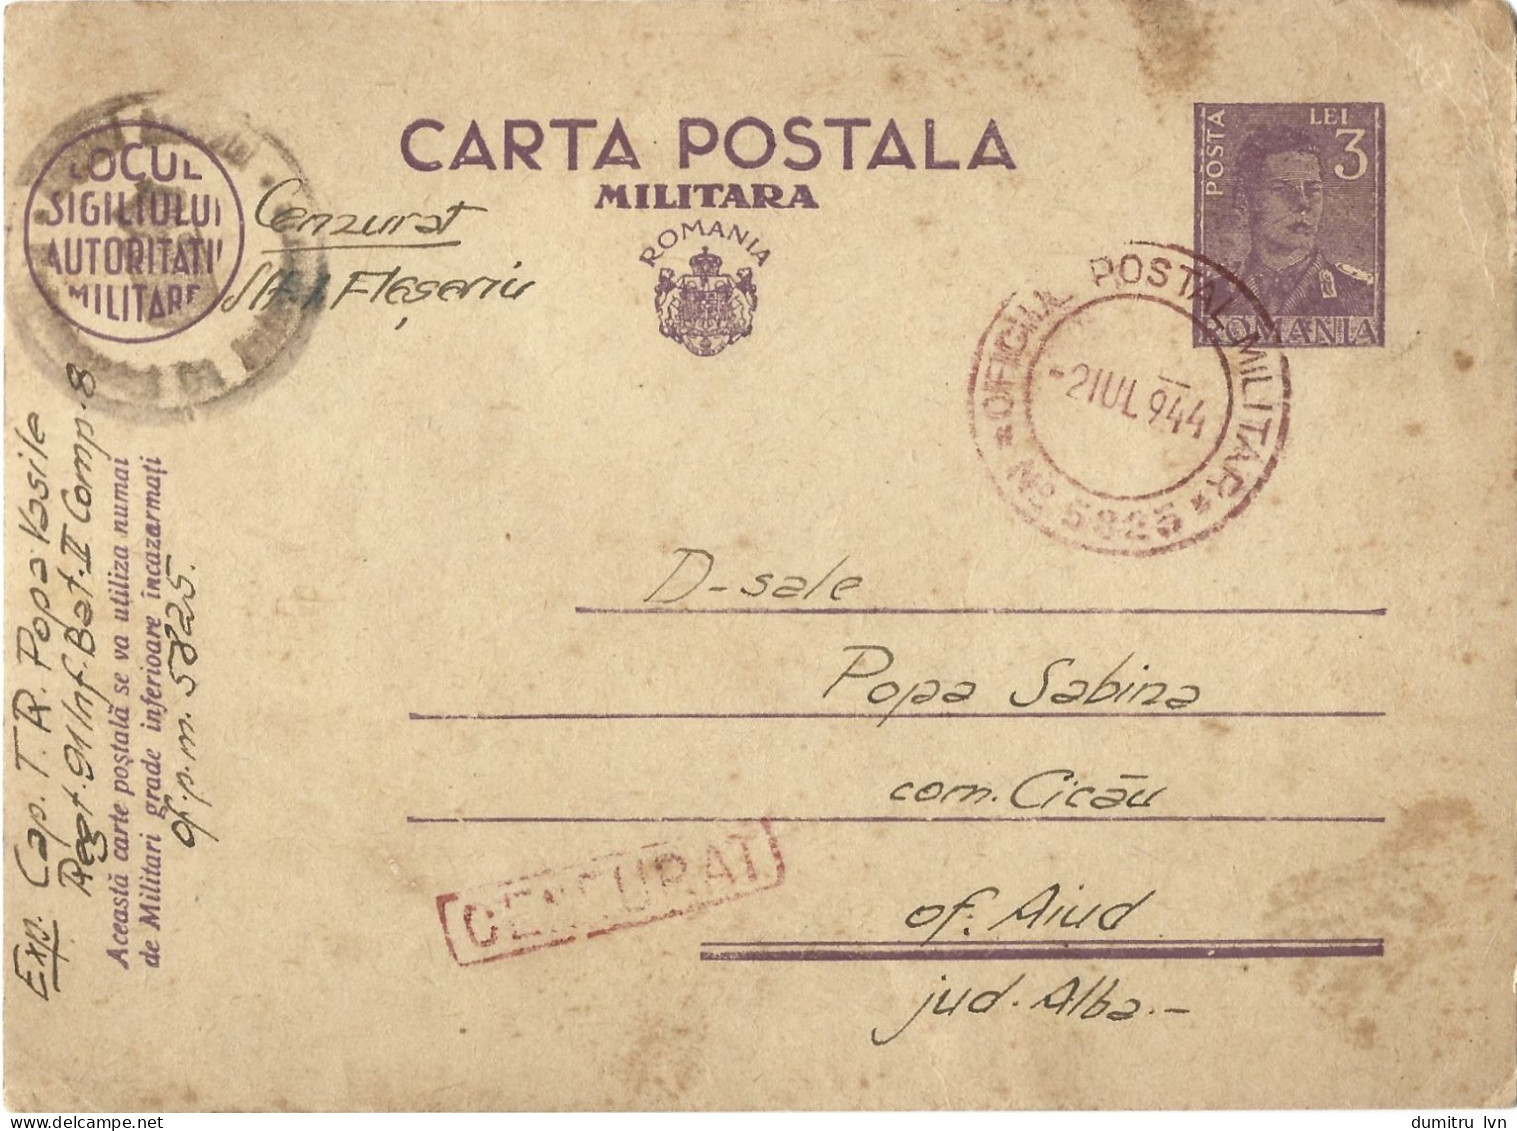 ROMANIA 1944 MILITARY POSTCARD, MILITARY CENSORED, OPM 5825, POSTCARD STATIONERY - Lettres 2ème Guerre Mondiale